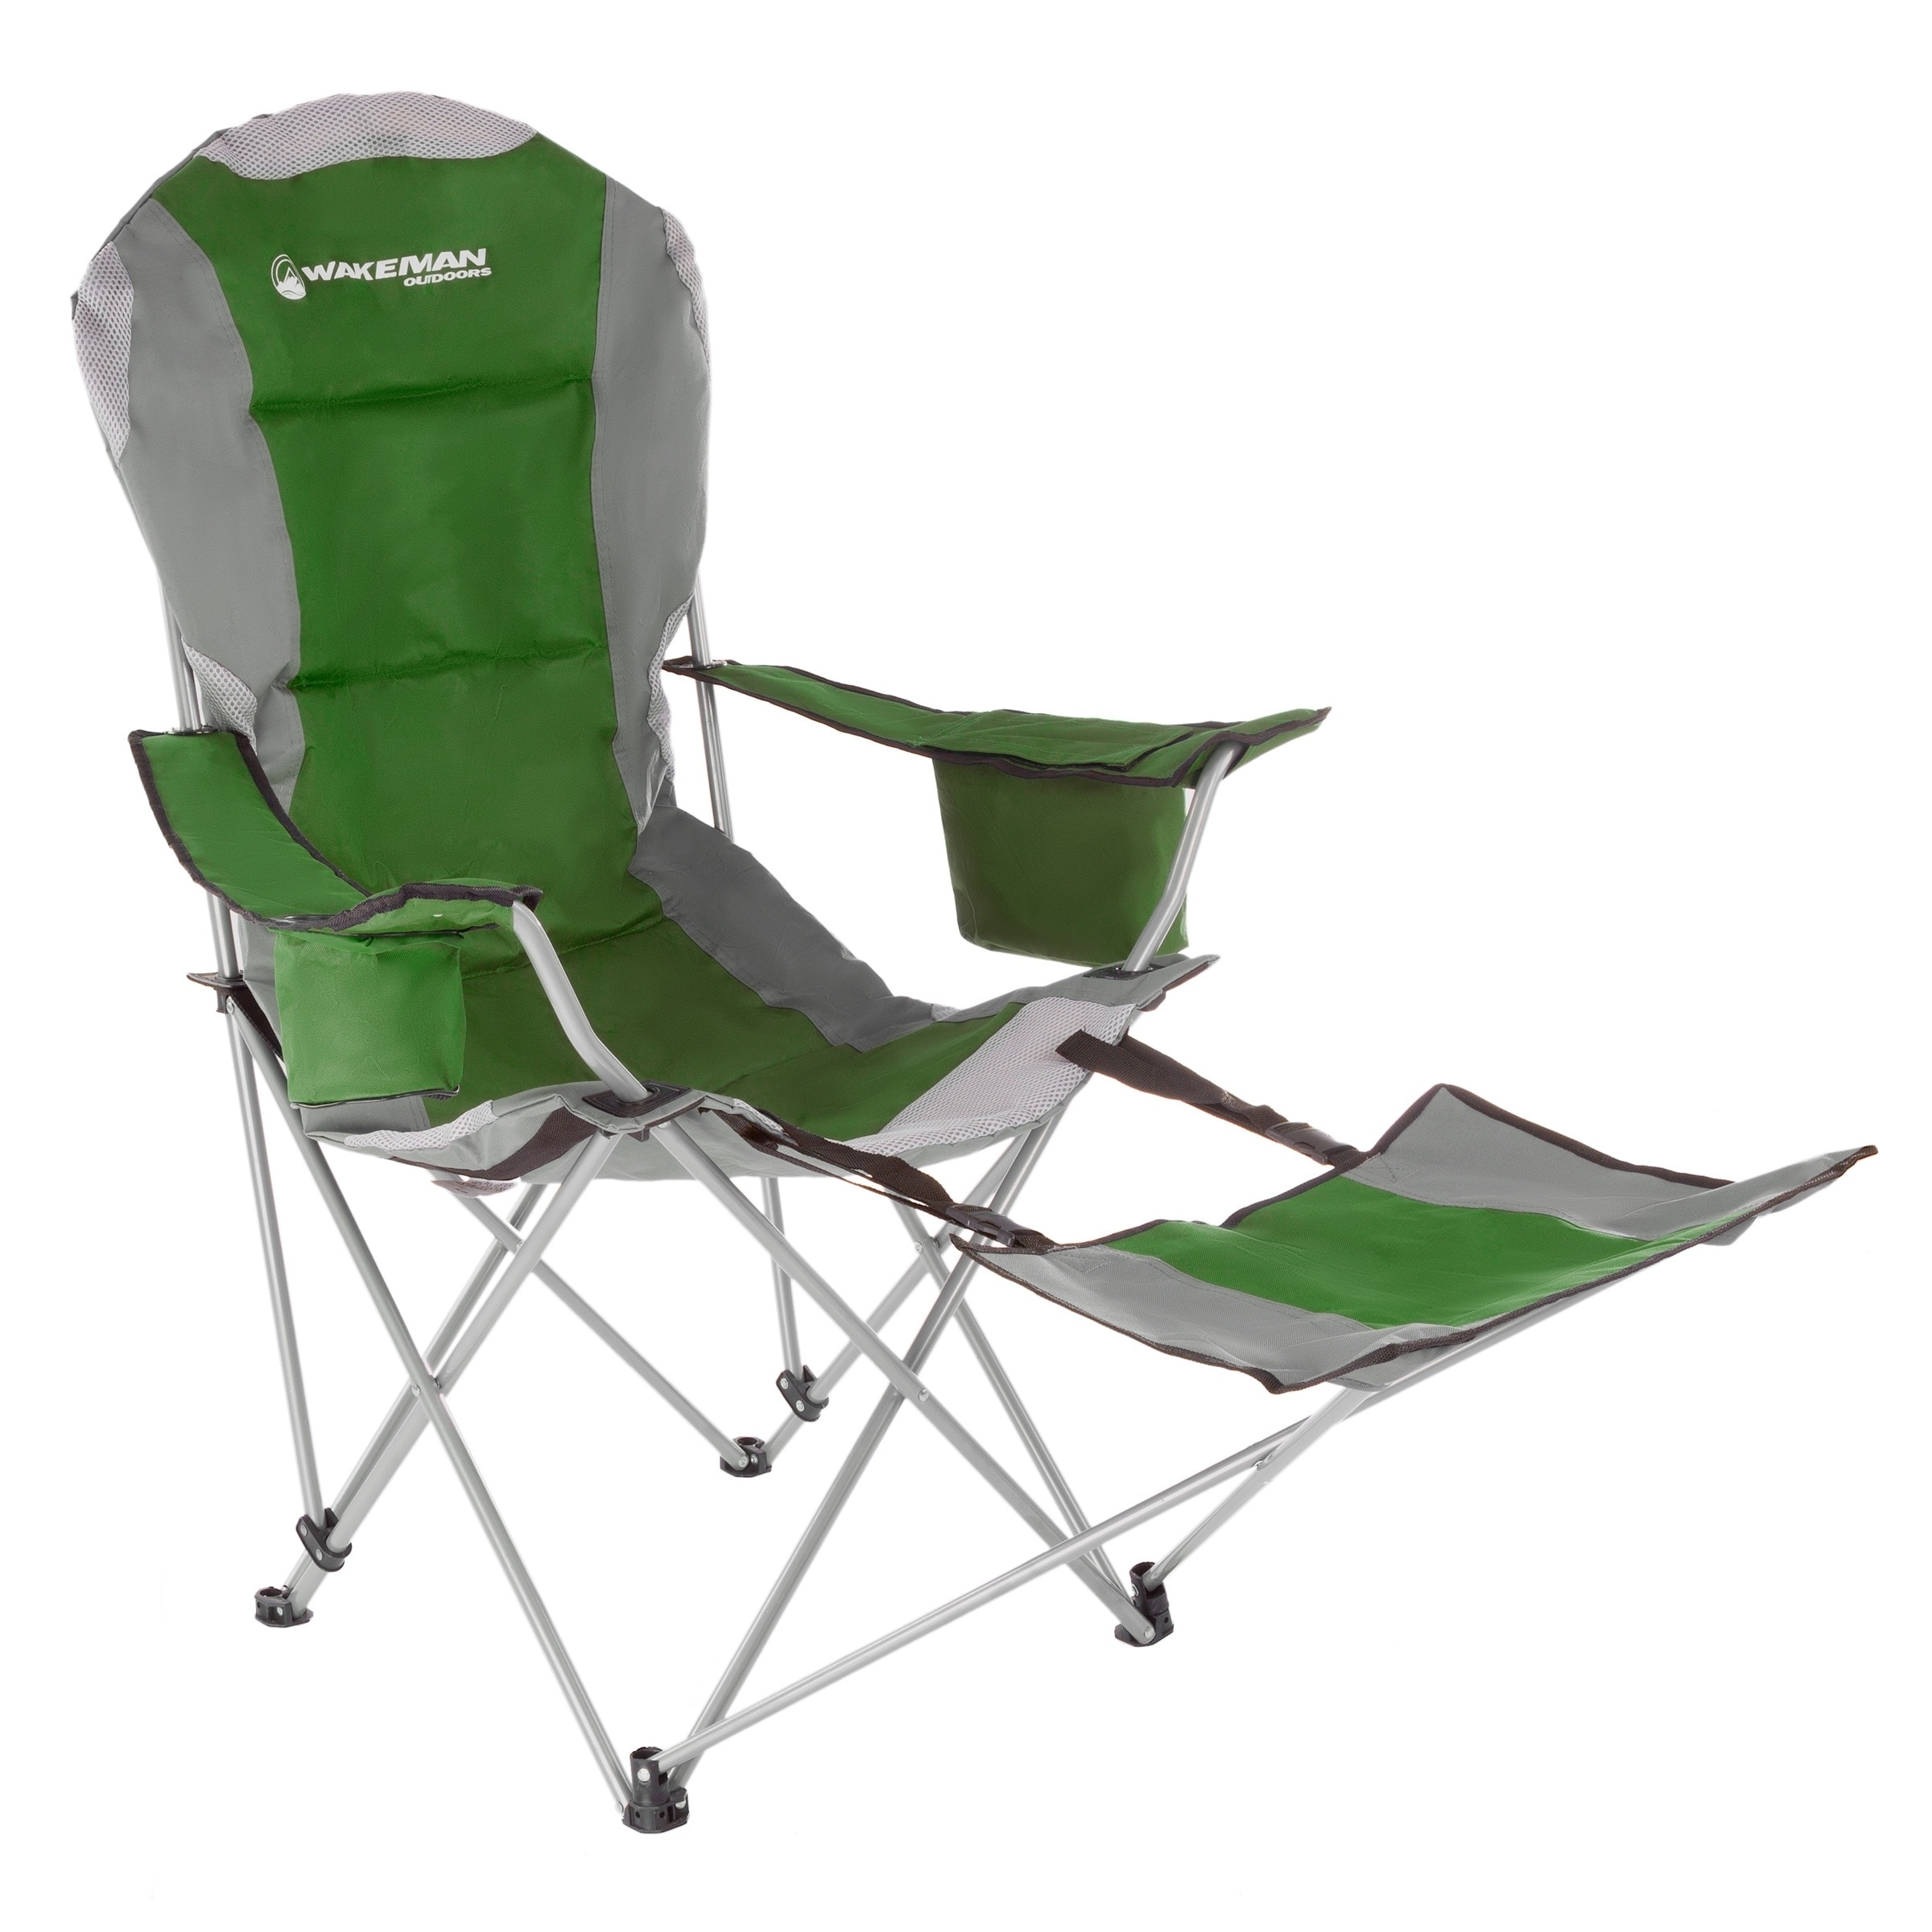 fold out chair with footrest